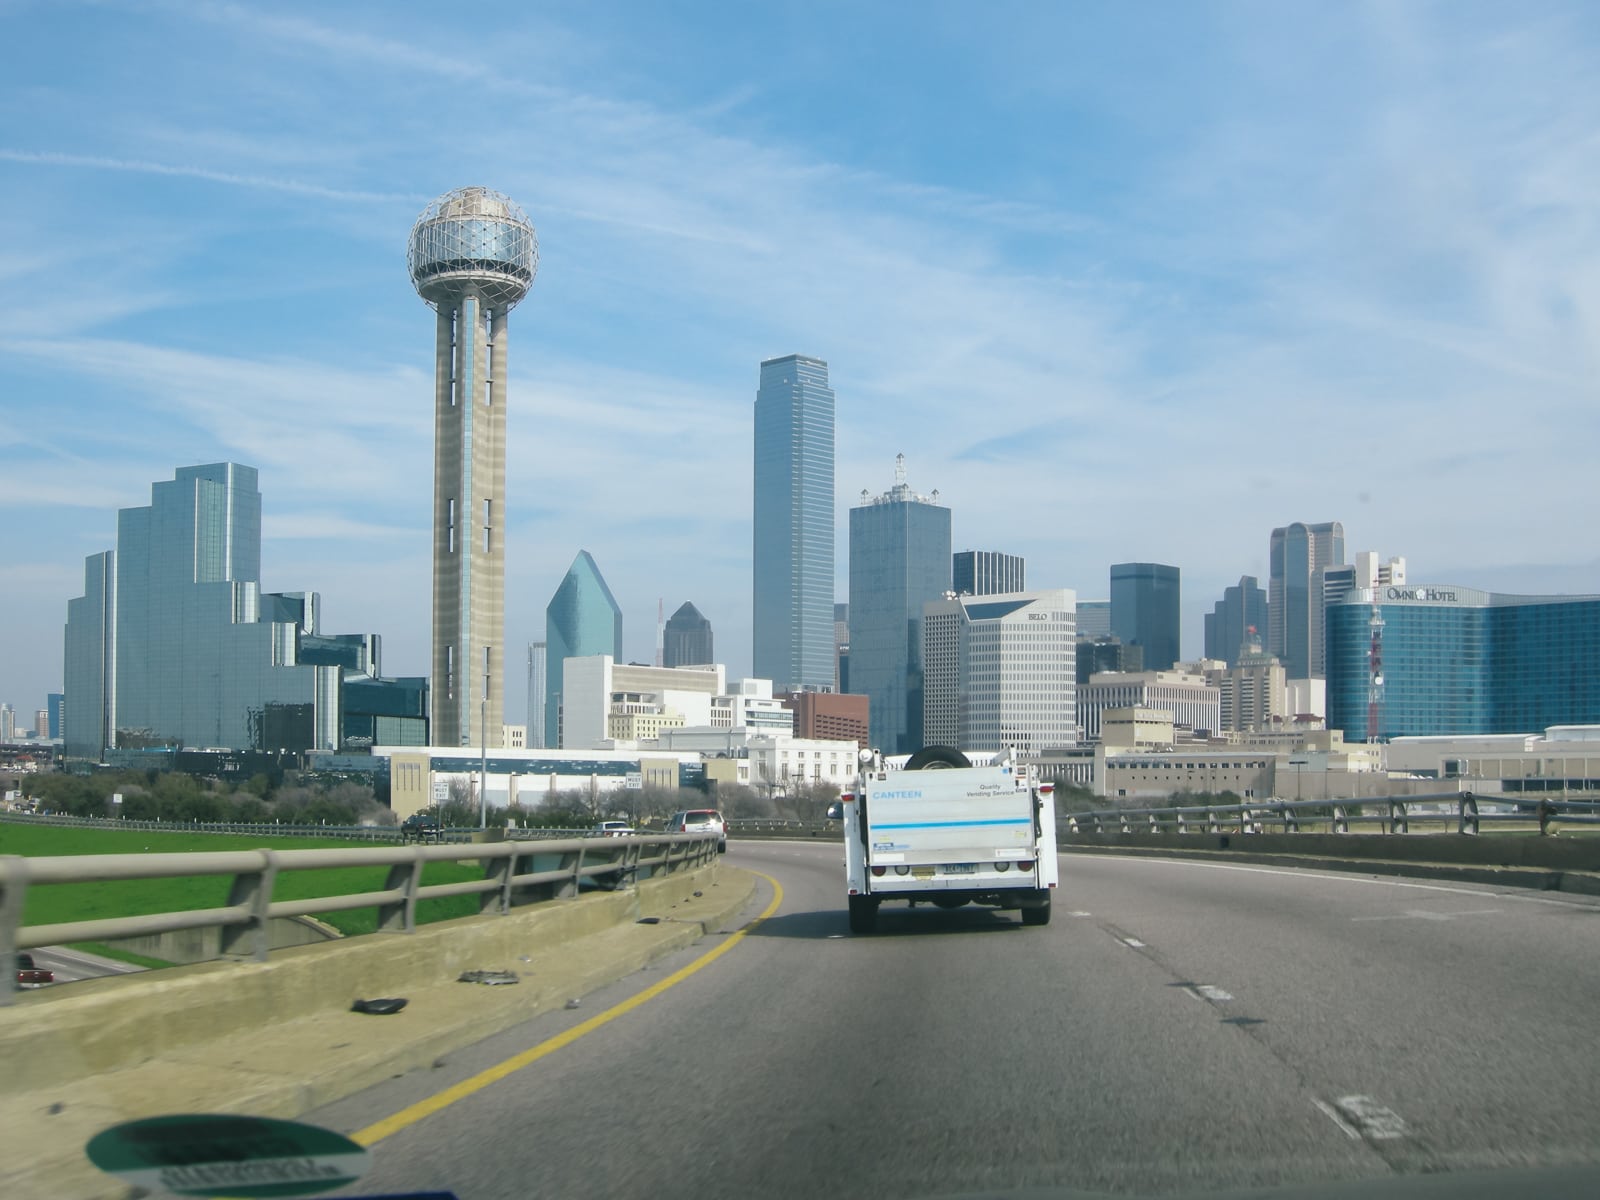 The Dallas skyline while commuting